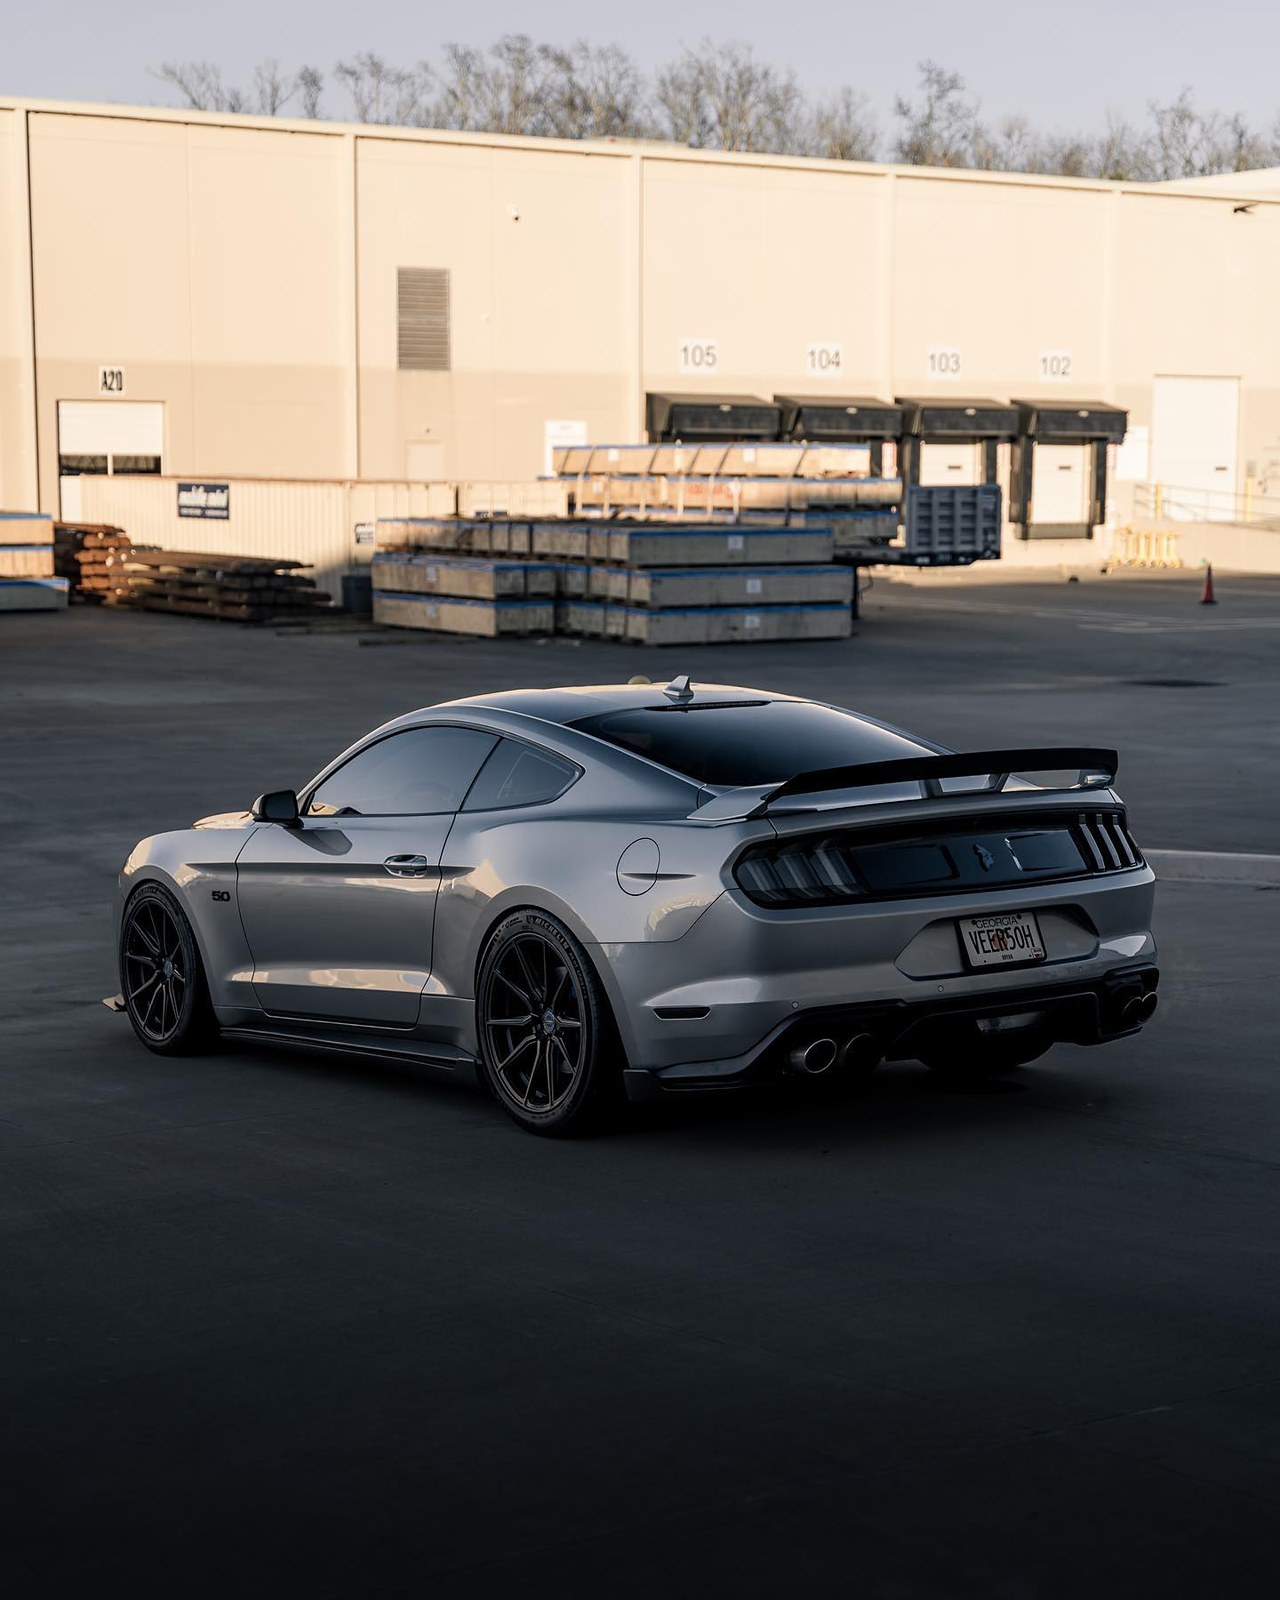 S650 Mustang Authorized Vossen Wheels Dealer: Hybrid Series and Full Forged Wheels For Mustang S650 1675111996327